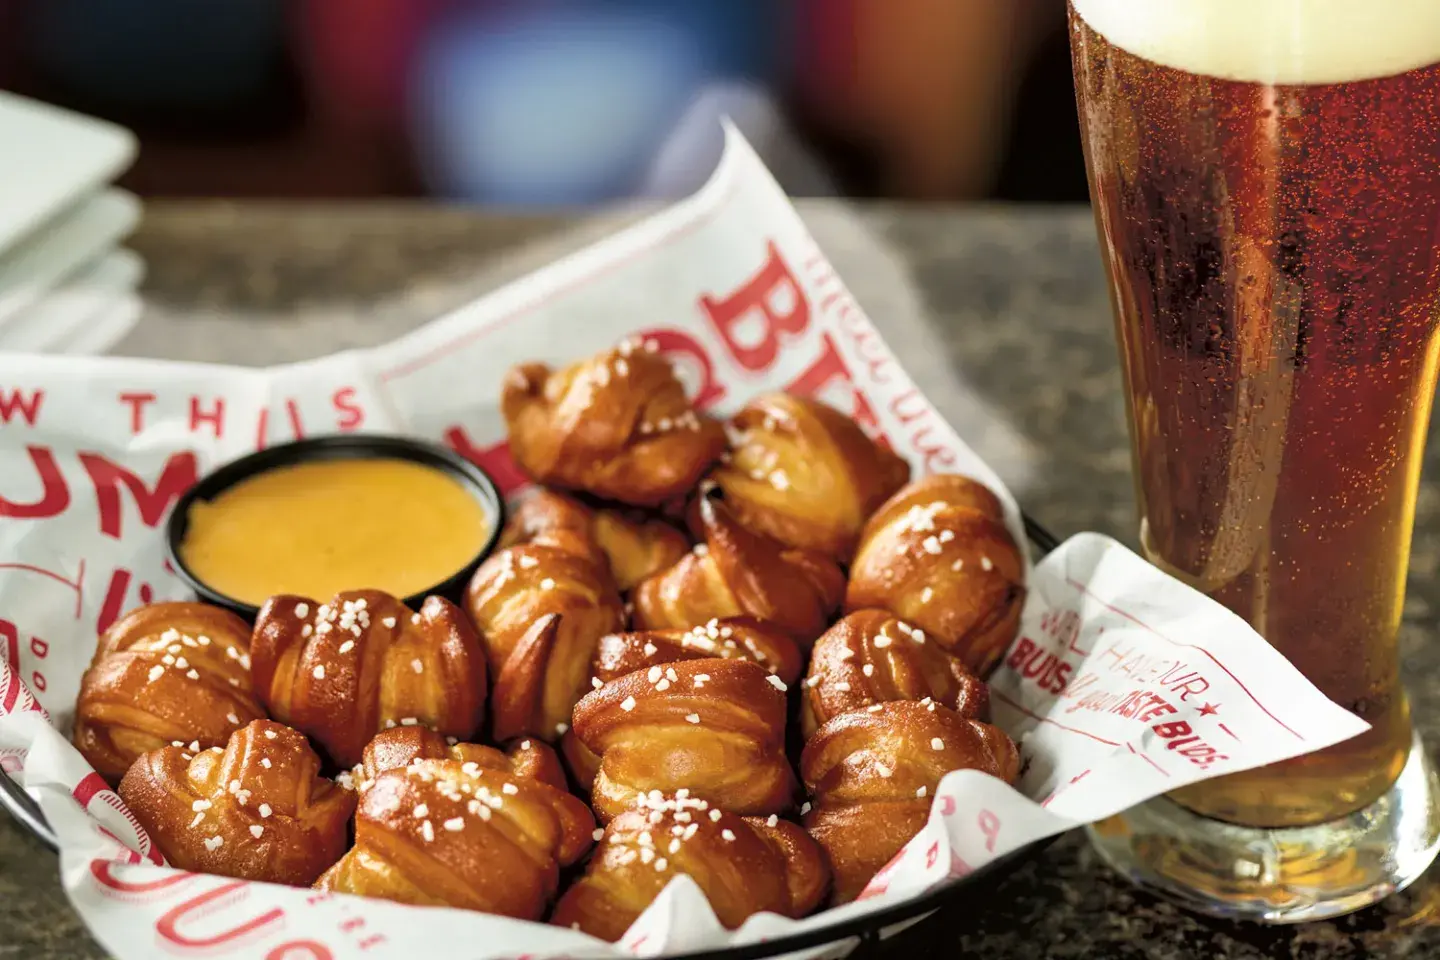 Red Robin Introduces New Happy Hour Specials with Lots of Food & Drink